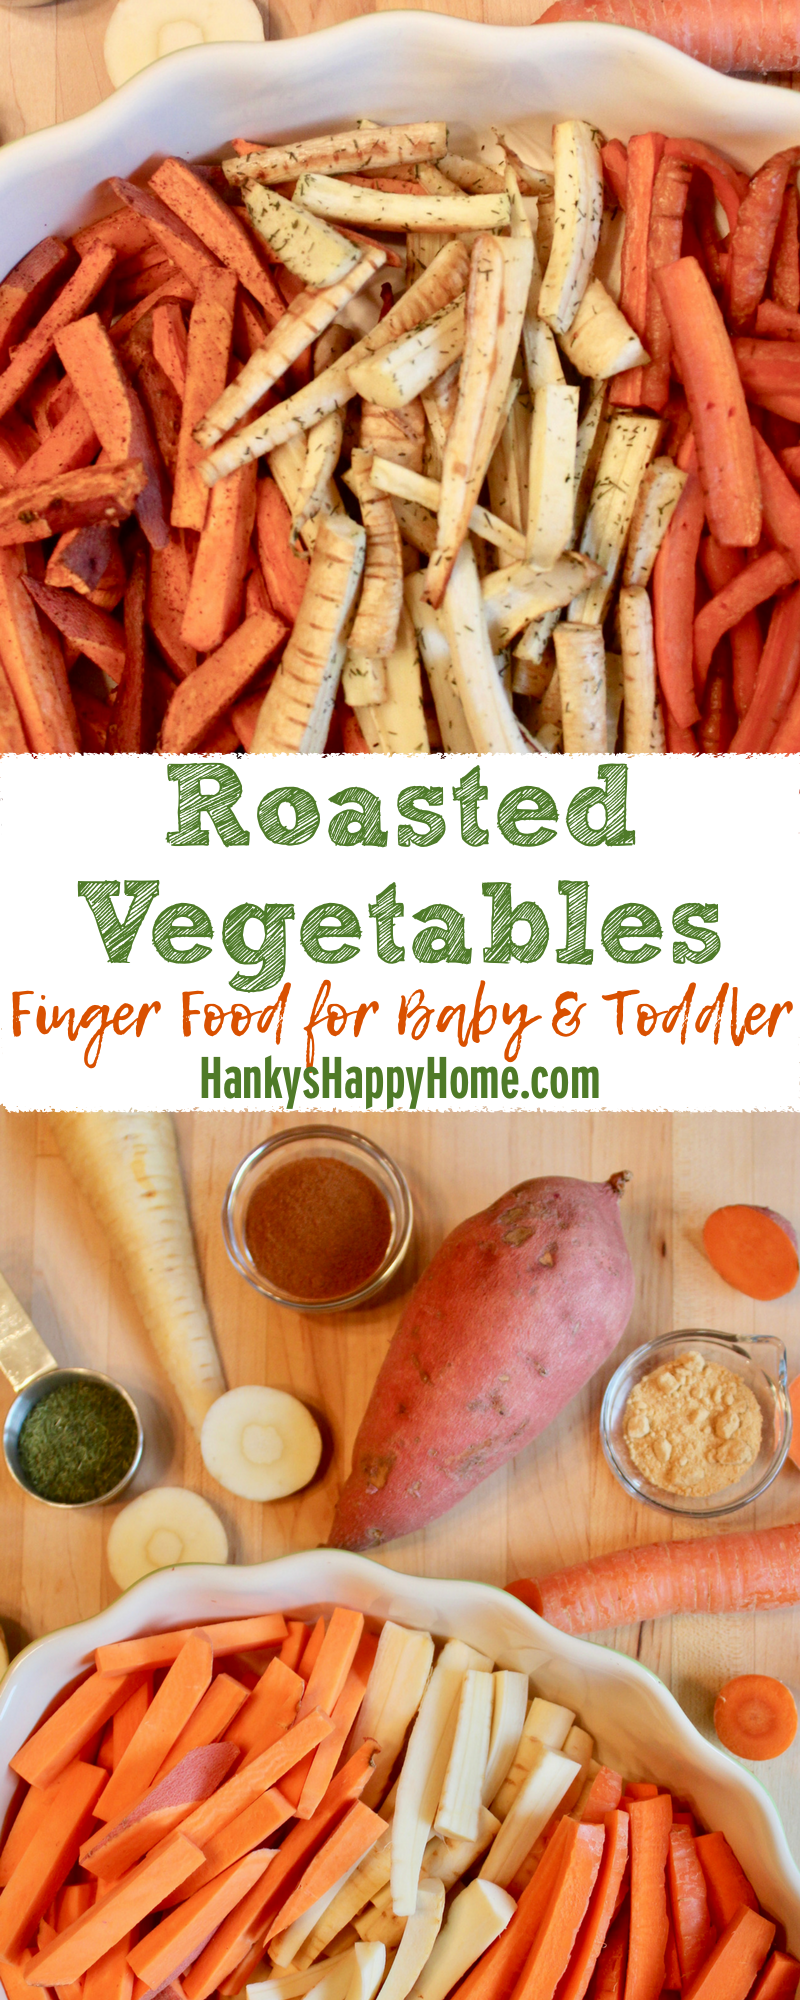 These Roasted Vegetables are a tender finger food for babies, a healthy snack for toddlers, or delicious side for family dinner. Try Sweet Potatoes, Carrots, and Parsnips together or just one to start!